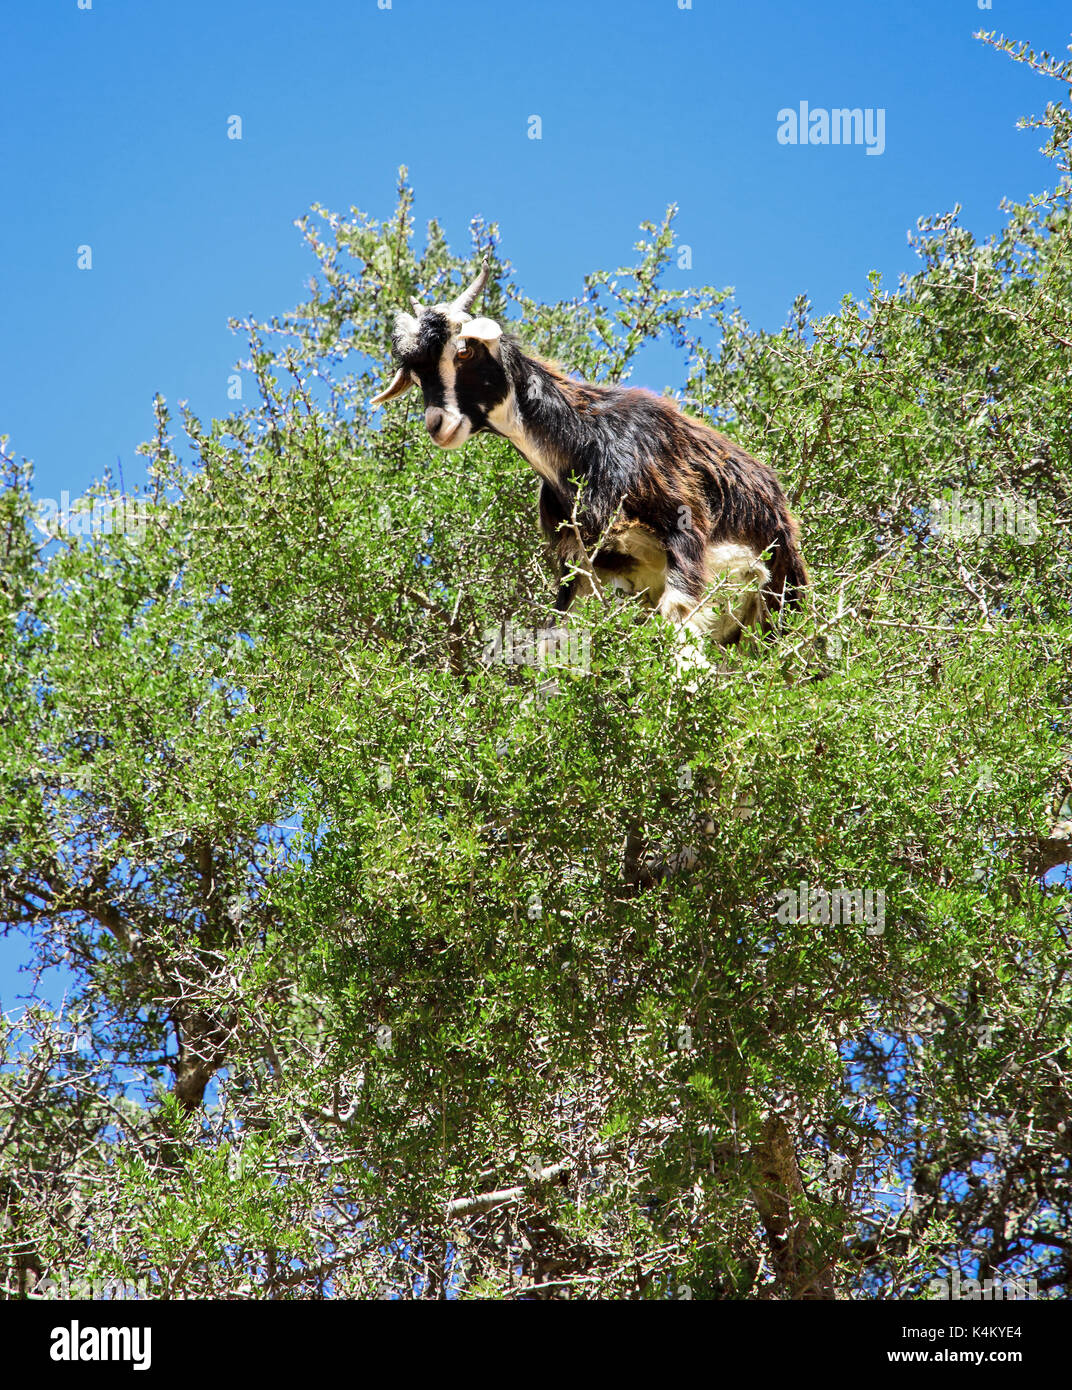 A goat on a tree Stock Photo